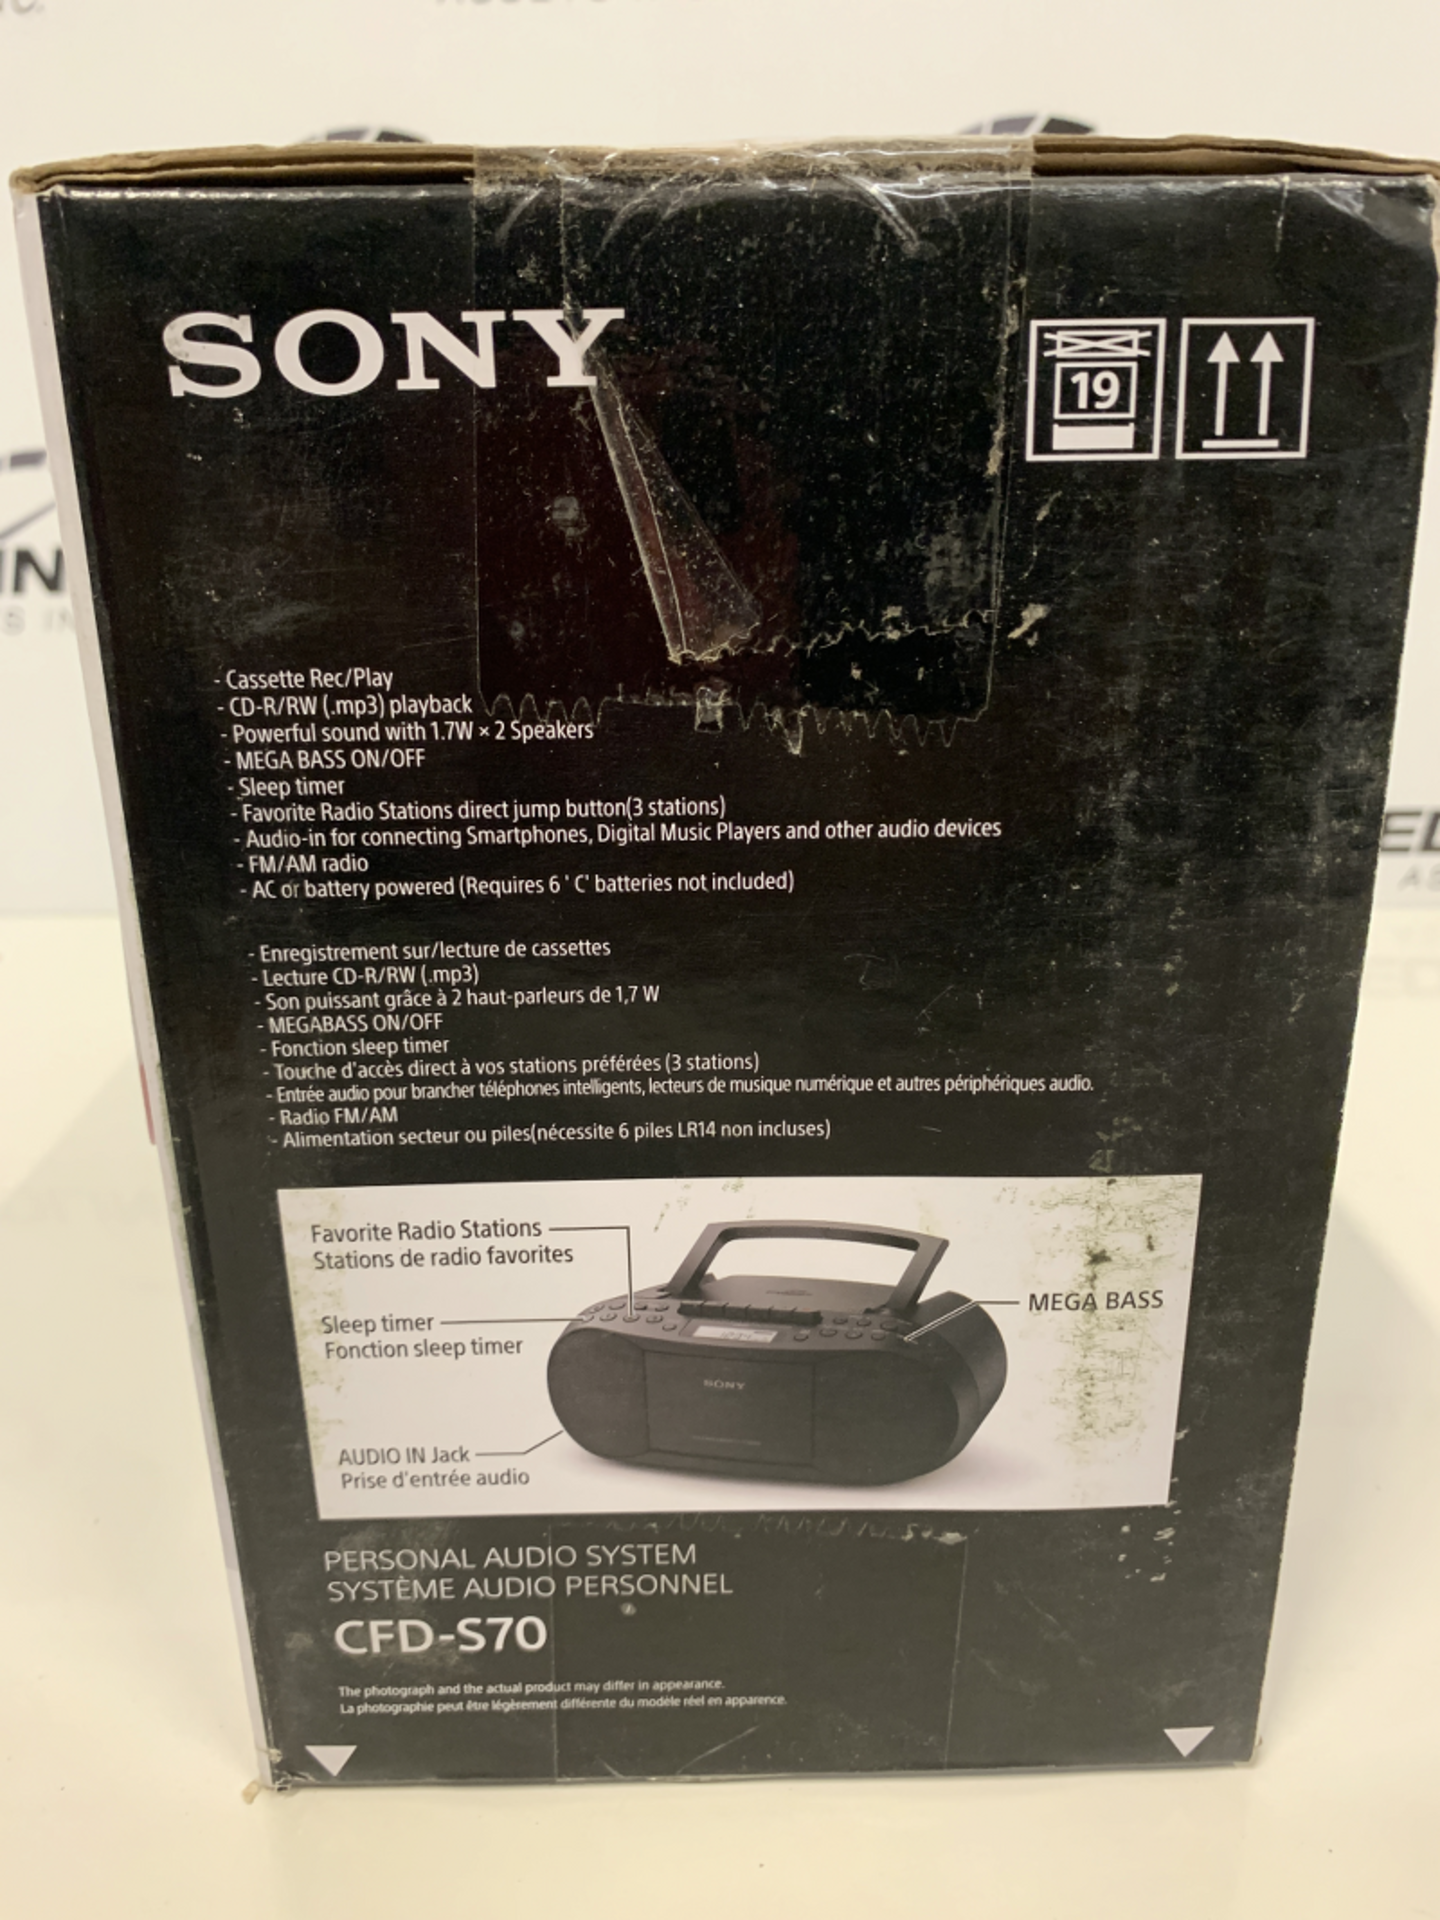 Sony - - Personal Audio System CFD-S70 CD, Cassette, FM/AM Boombox - Image 2 of 2